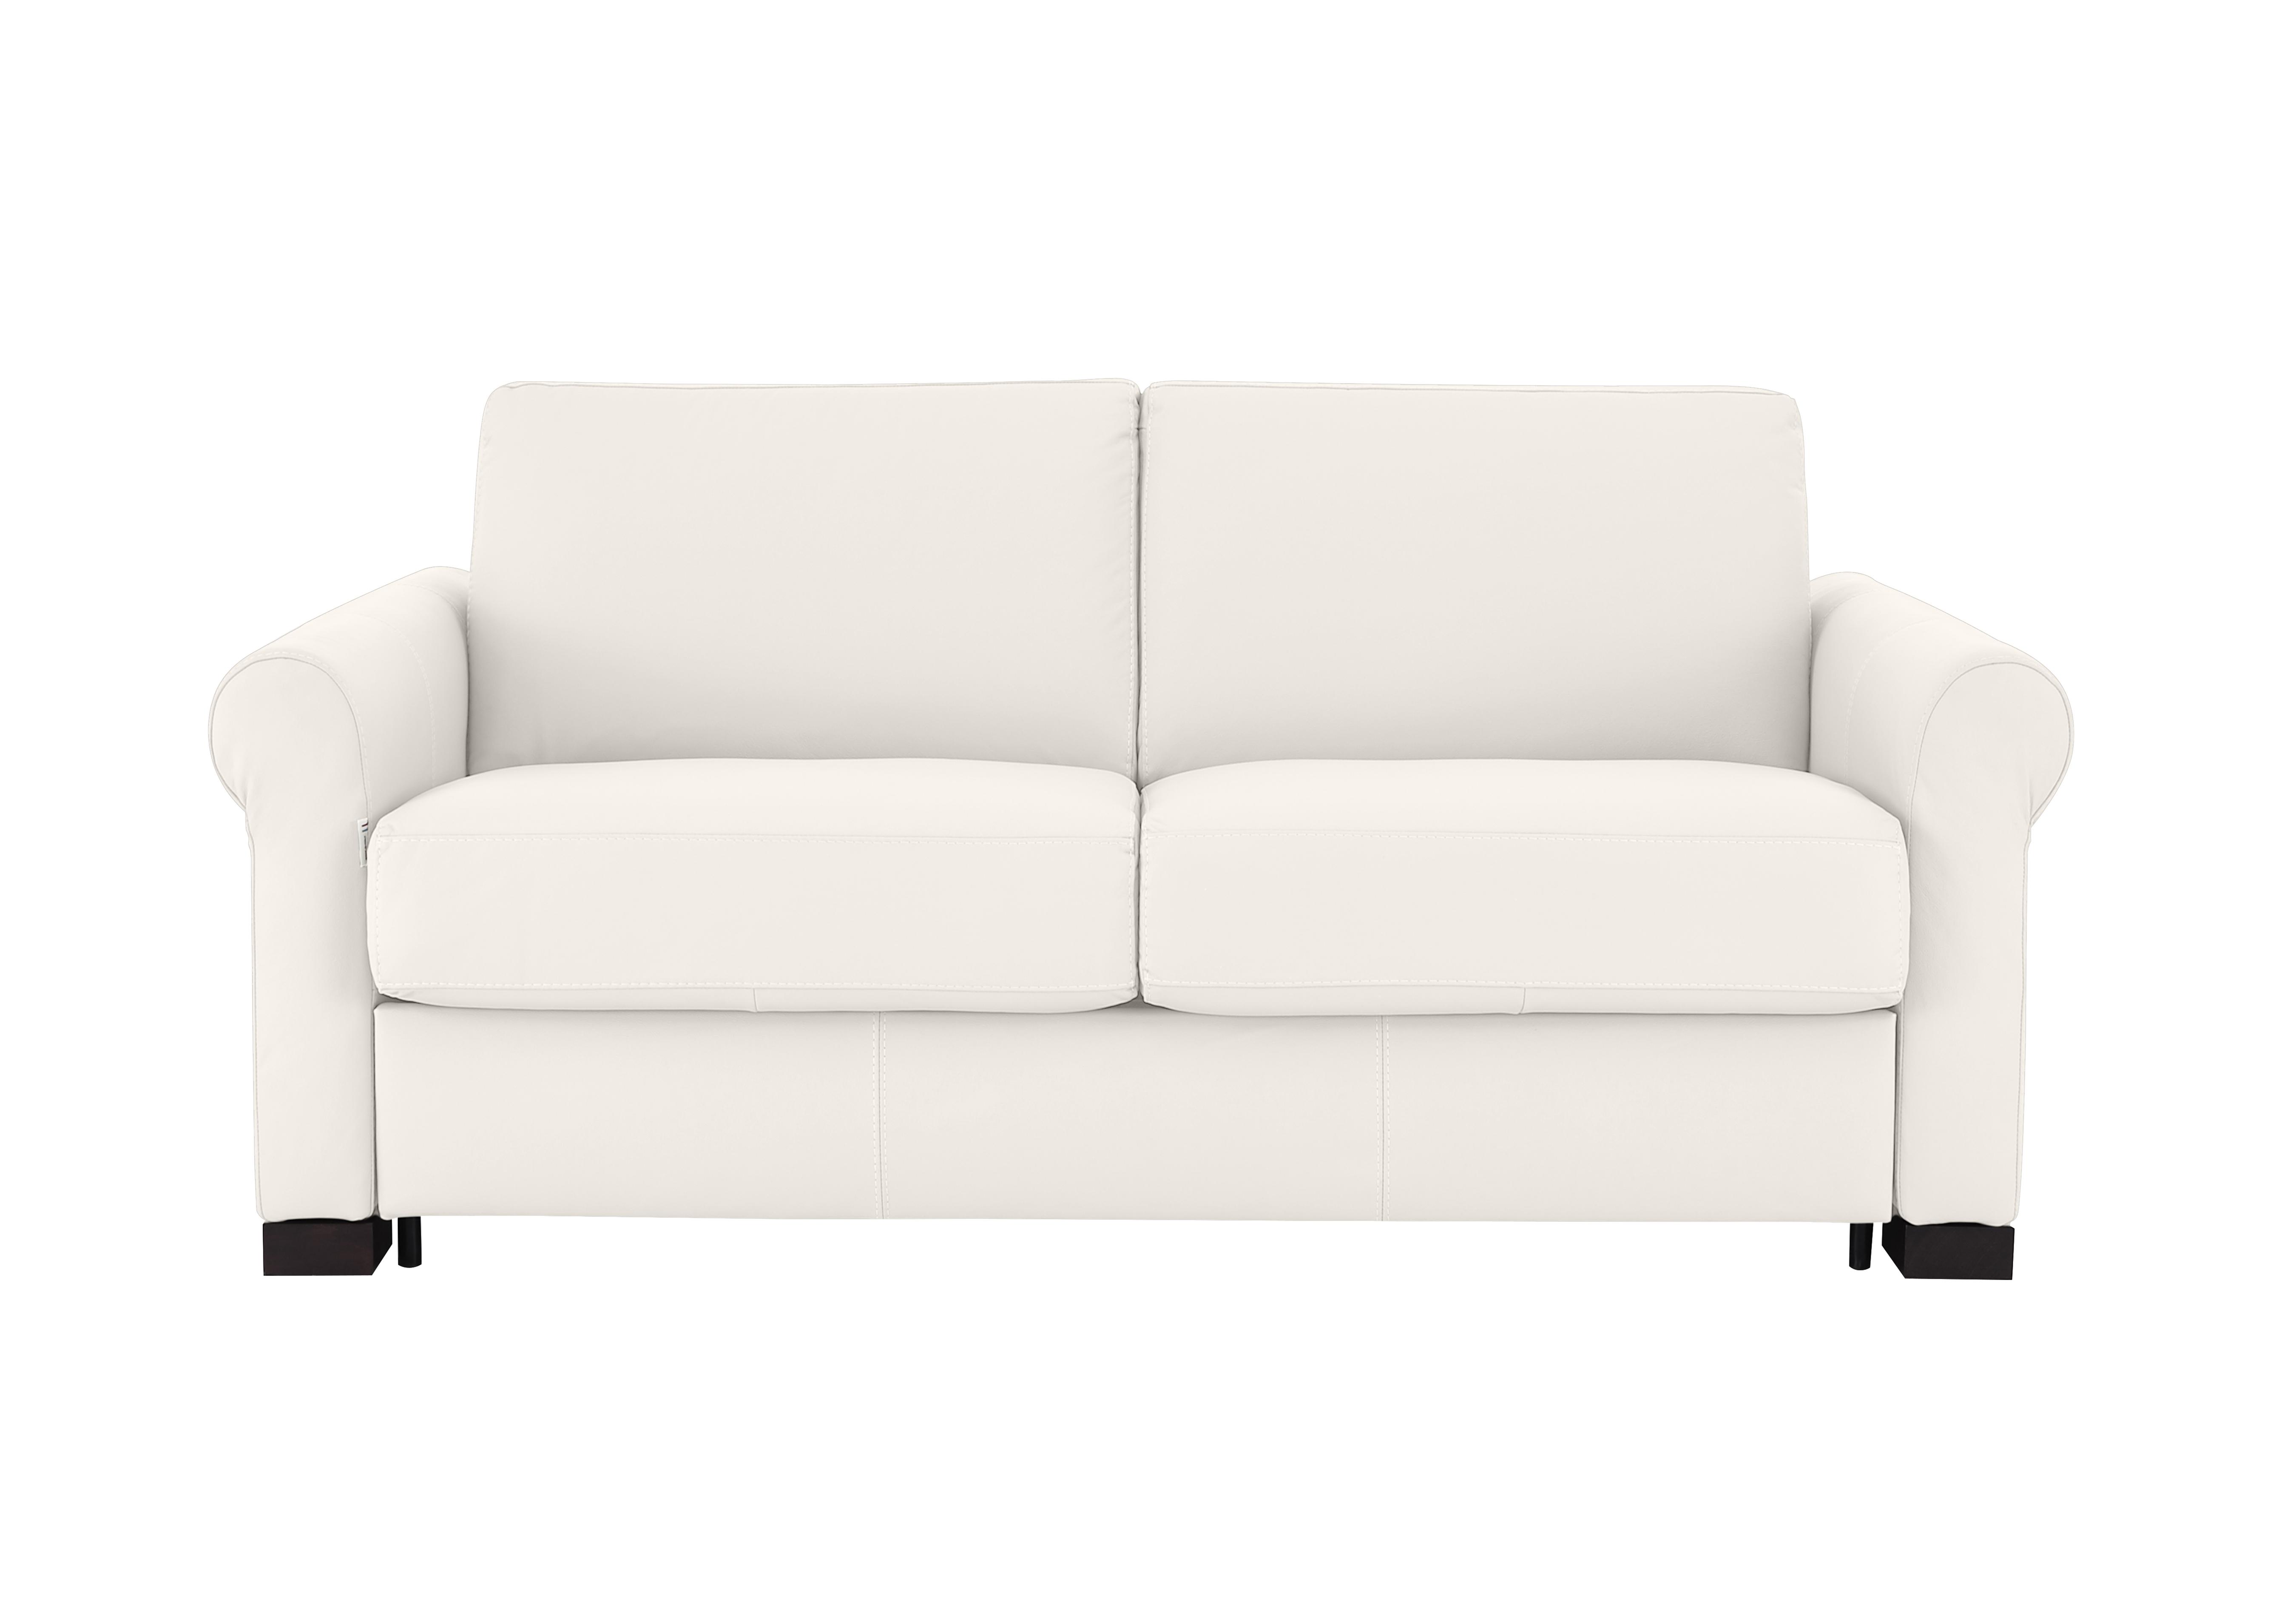 Alcova 2 Seater Leather Sofa Bed with Scroll Arms in Torello Bianco 93 on Furniture Village